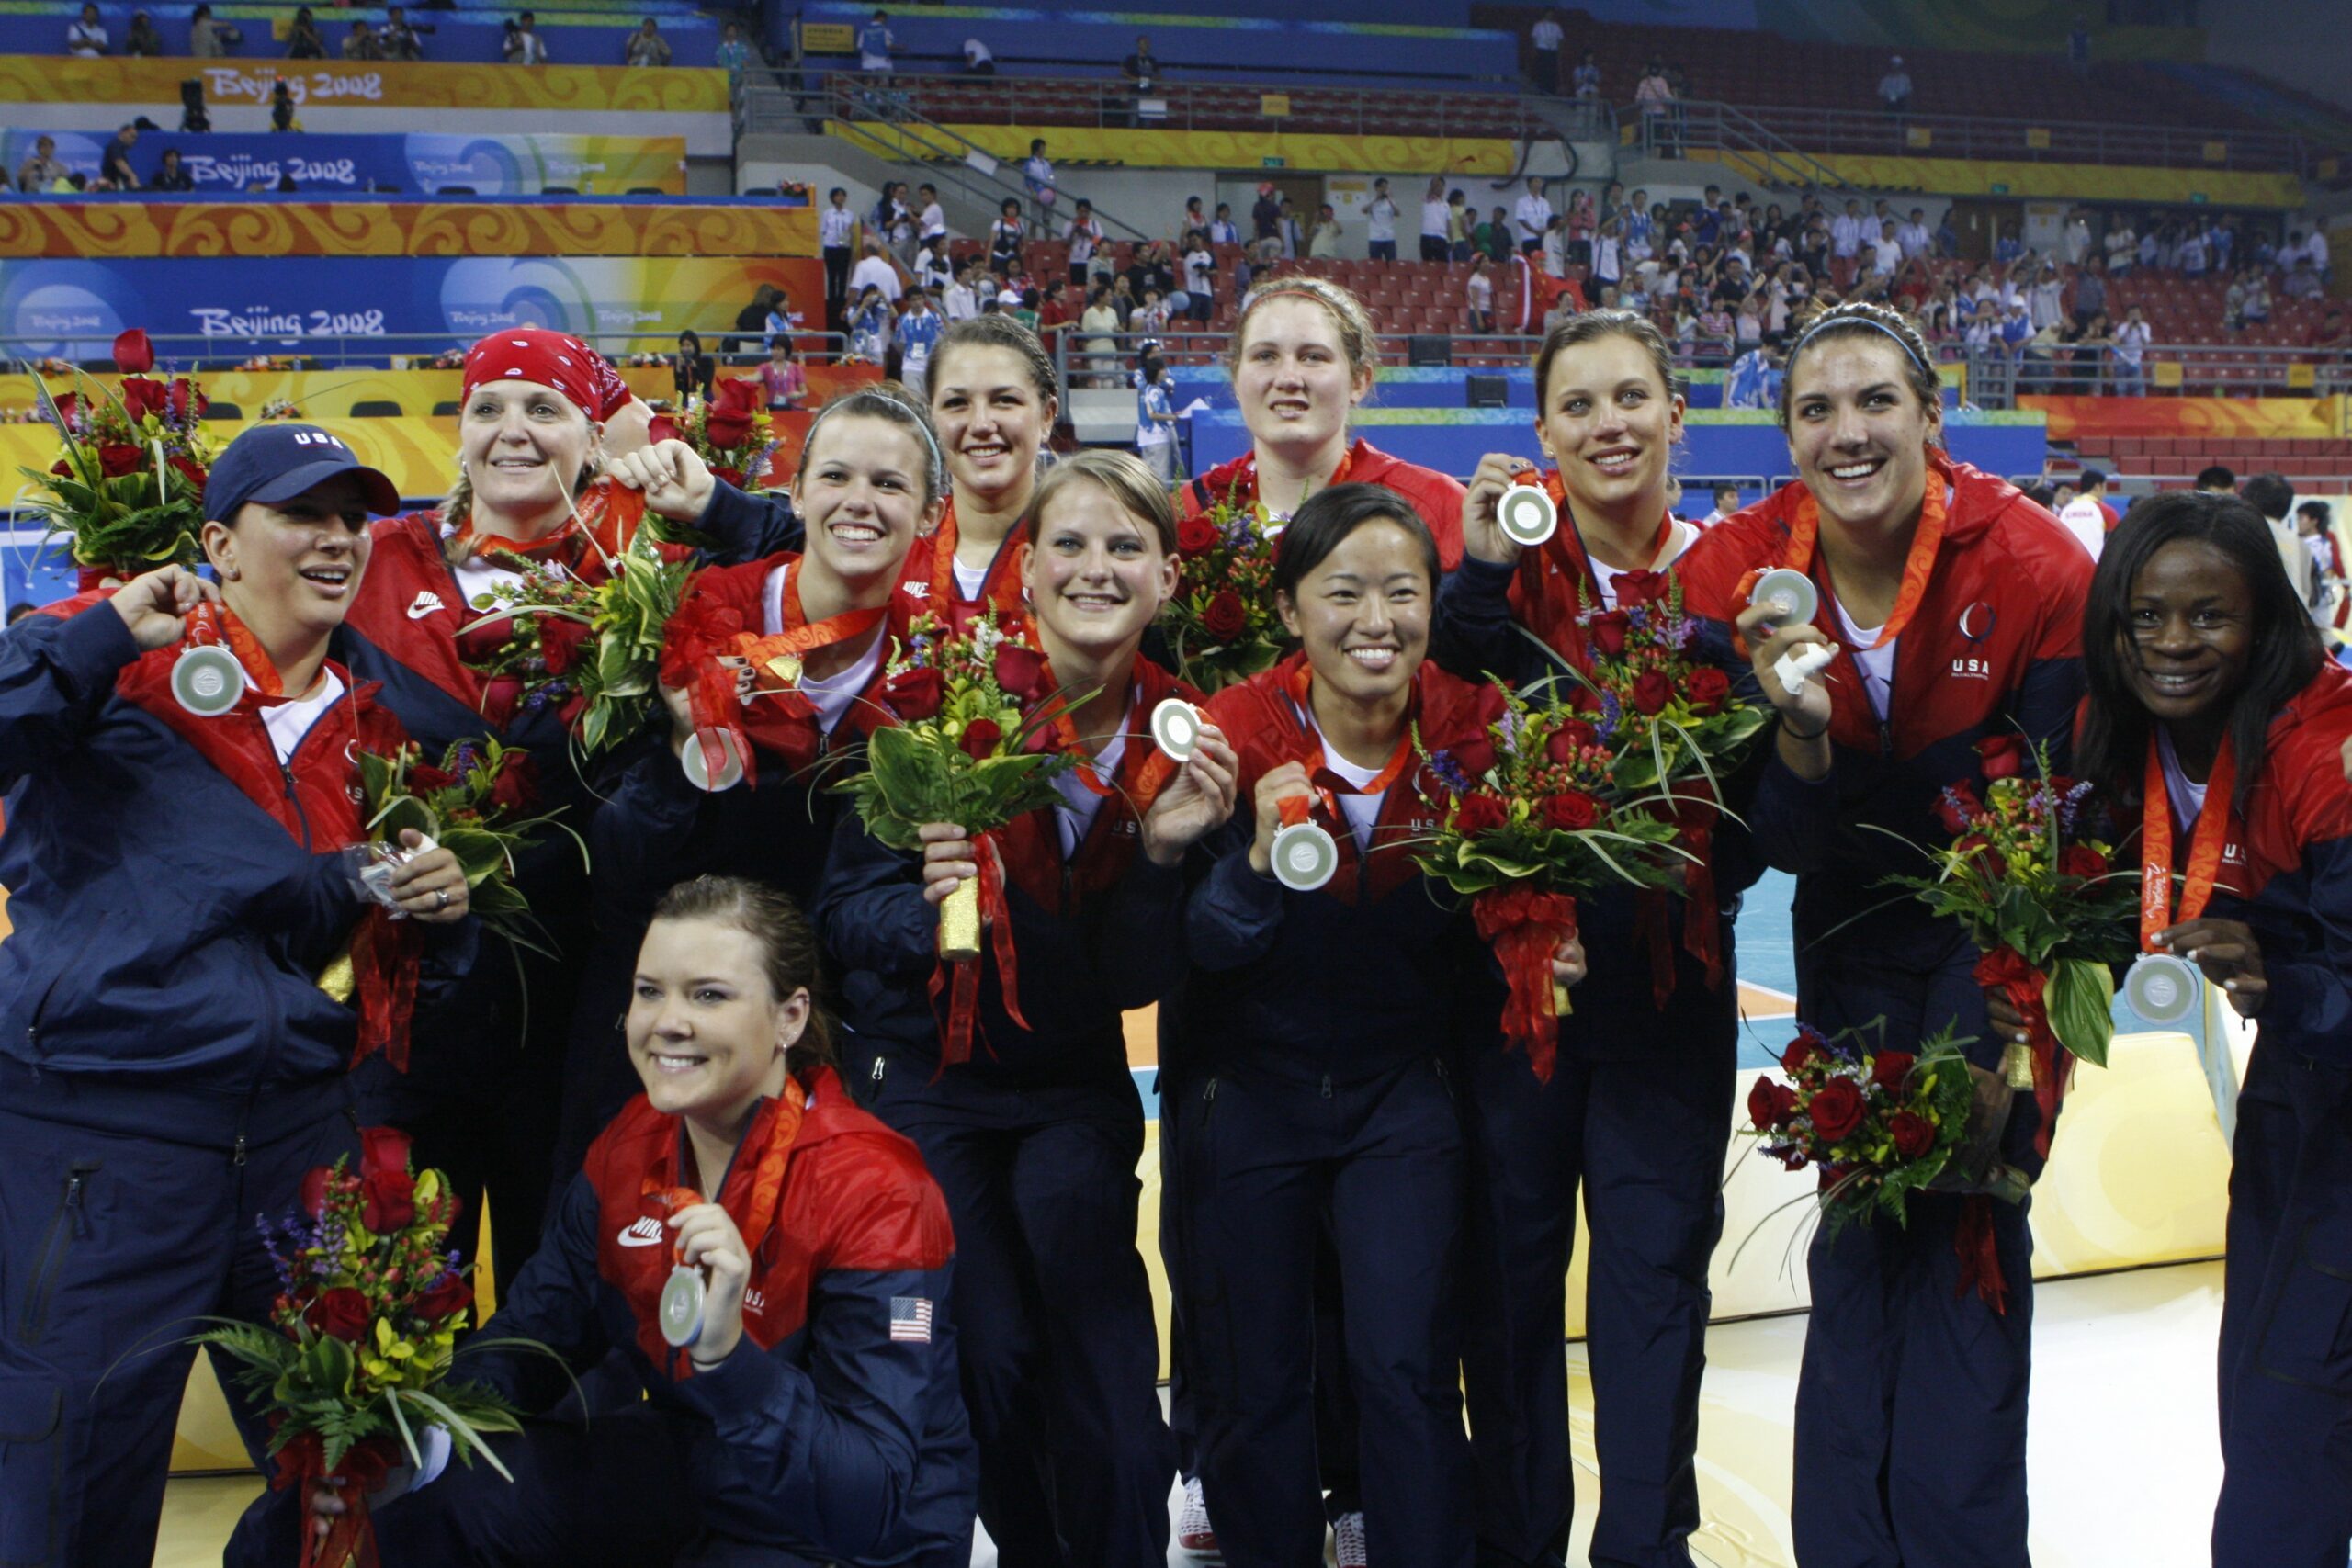 The 2008 U.S. Women's Paralympic Sitting Volleyball team members pose for a photo with their silver medals.